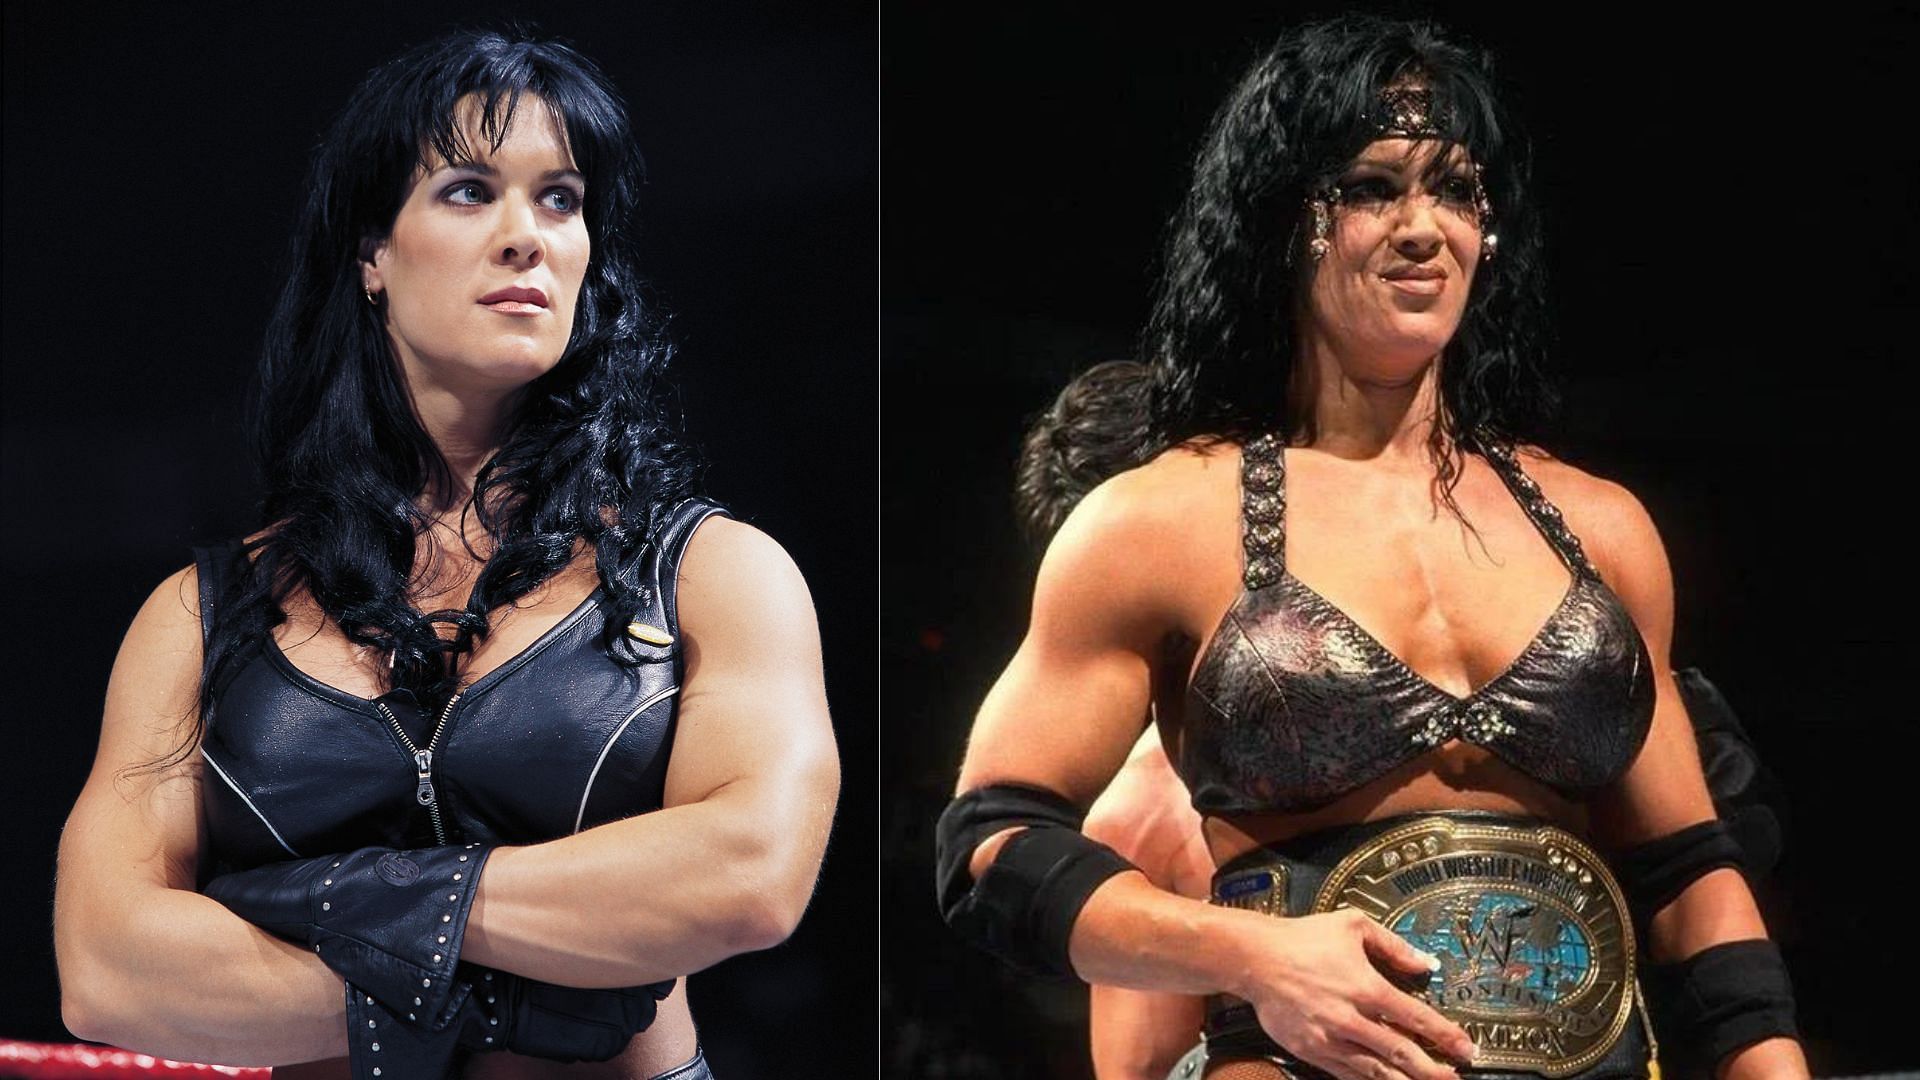 Chyna was inducted into the WWE Hall of Fame alongside DX in 2019. 